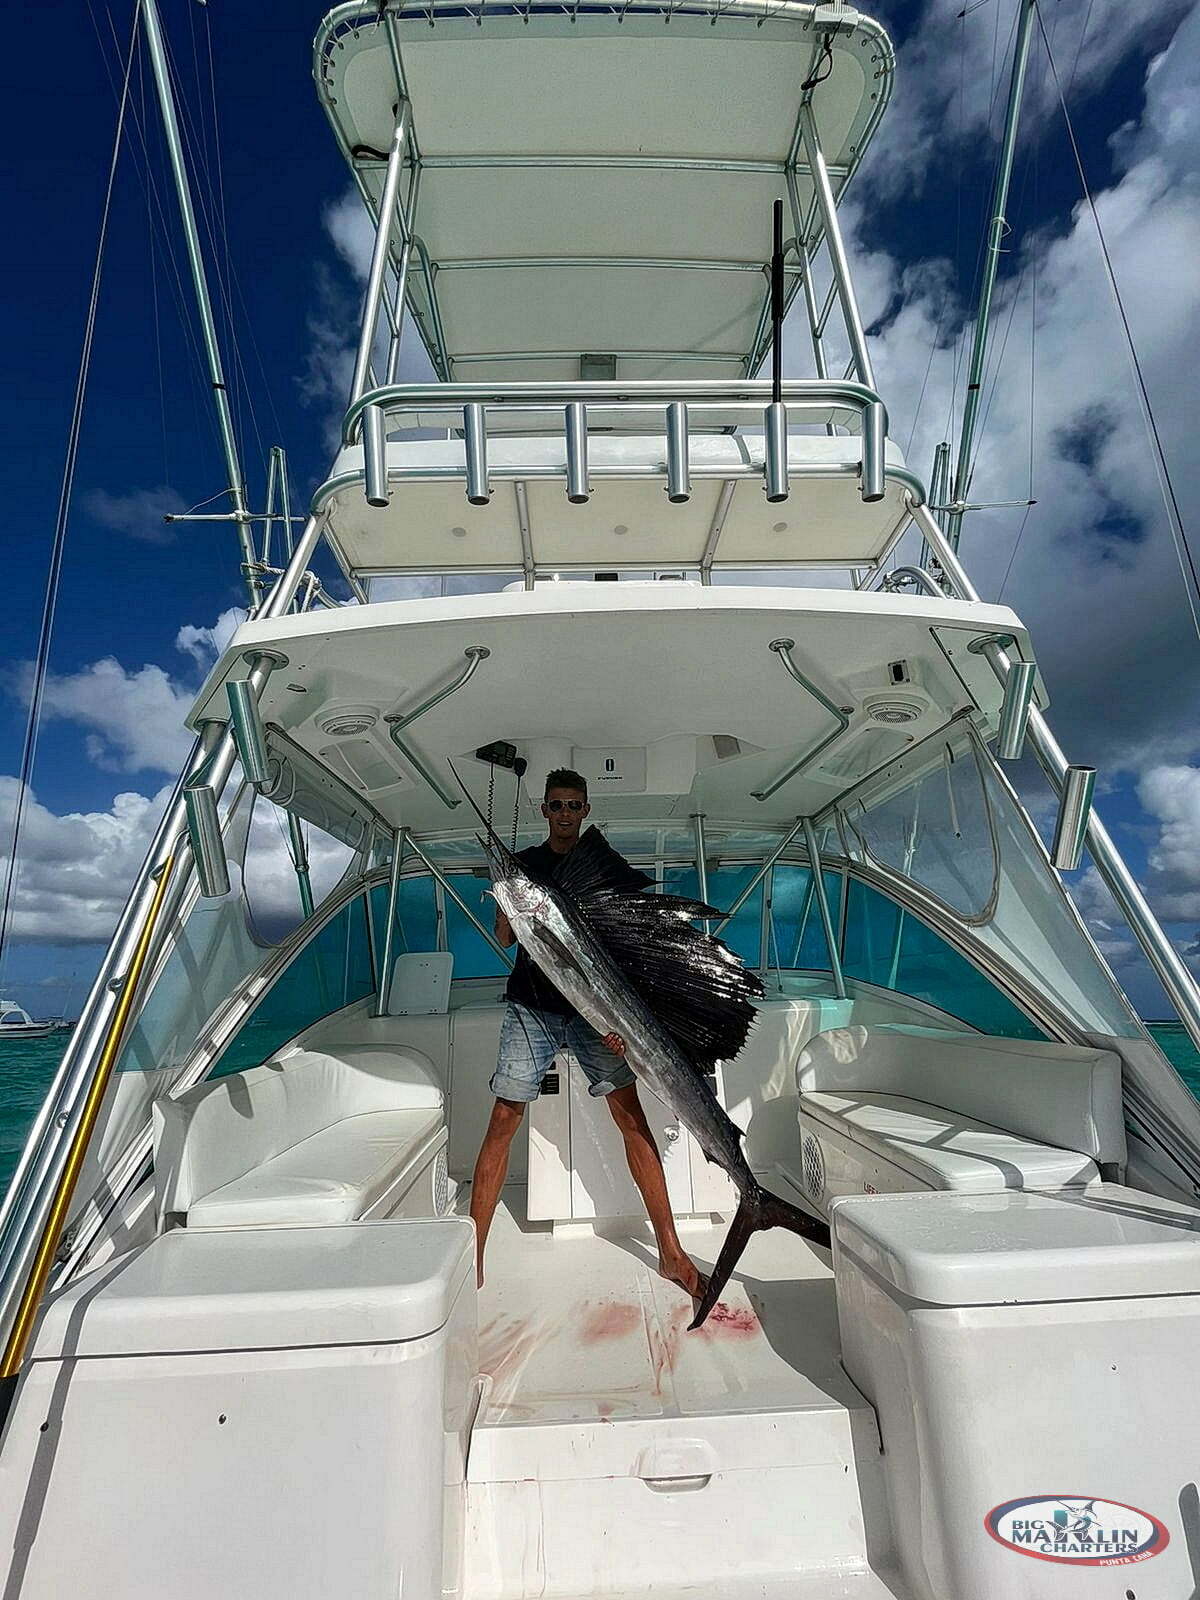 Punta cana the best choice for fishing in DR